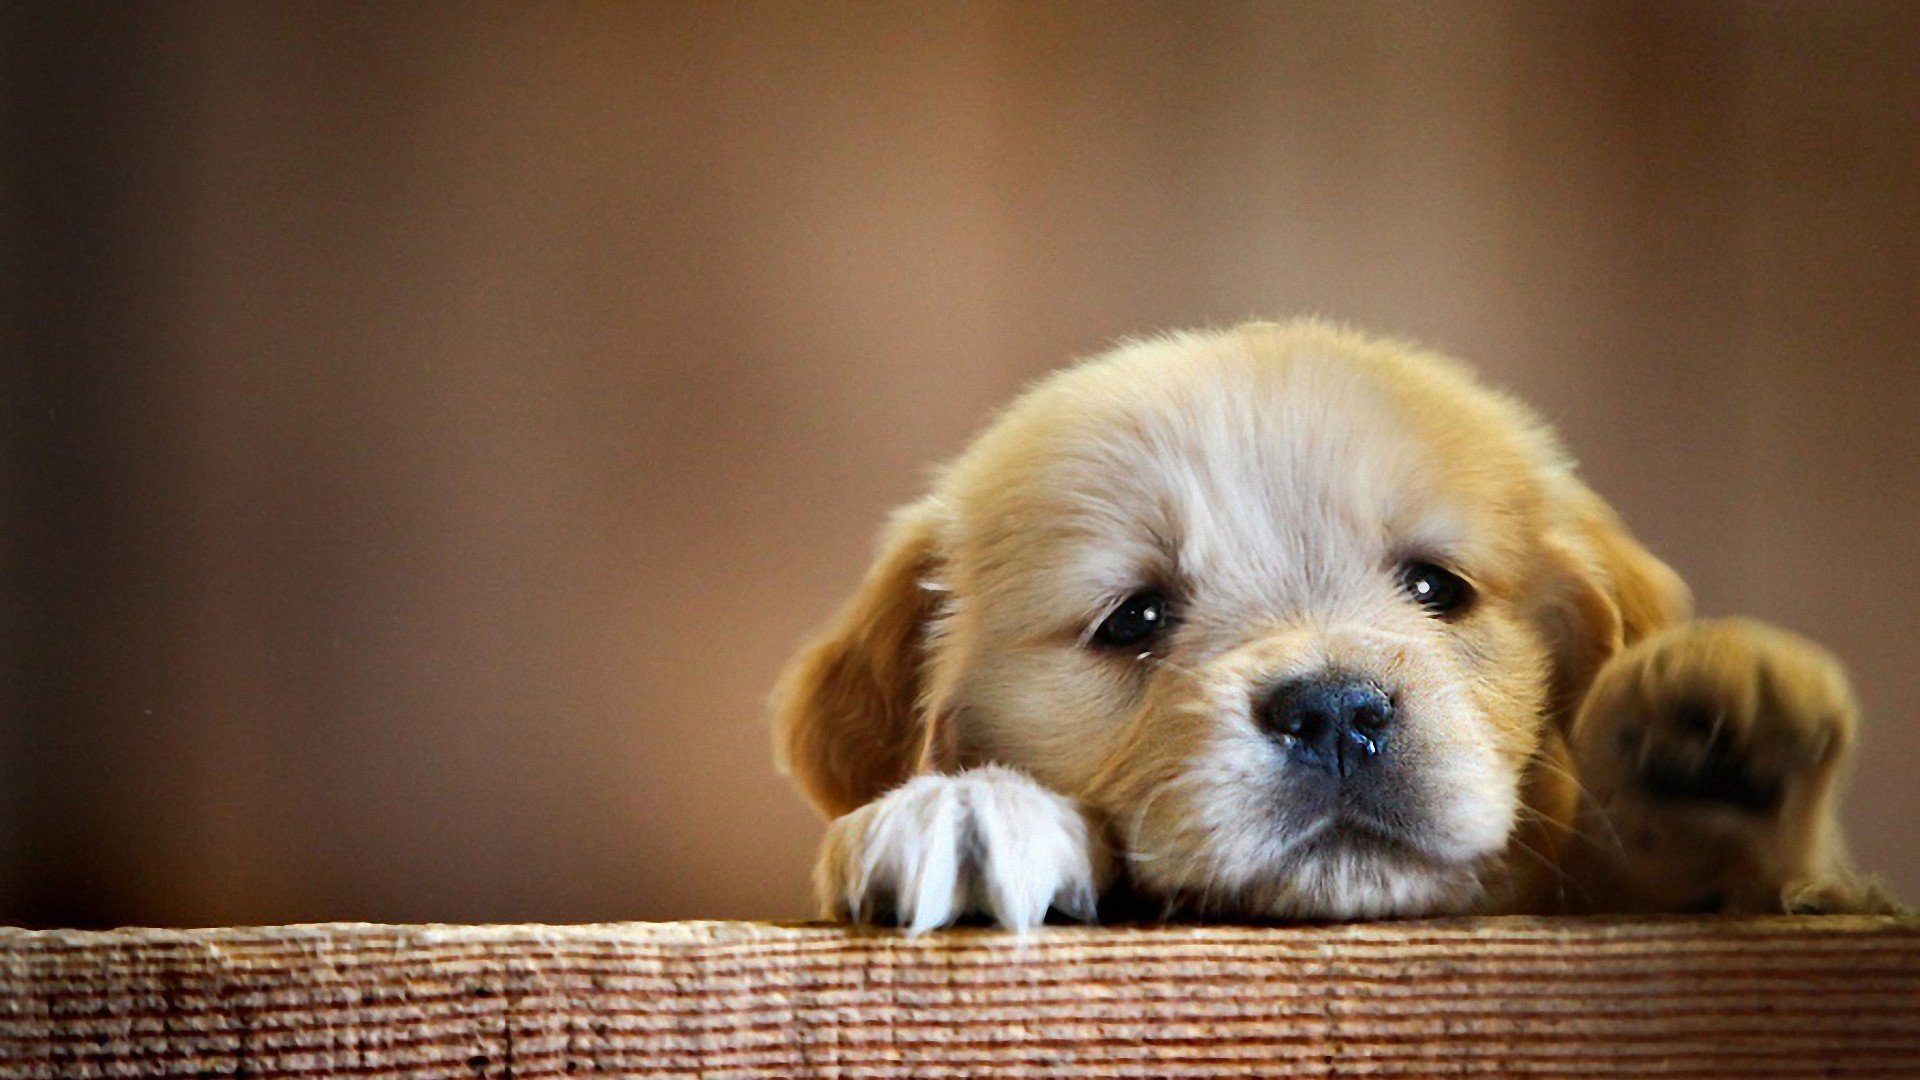 puppy, Want, To, Play, Animal, Cute, Baby, Dog Wallpaper